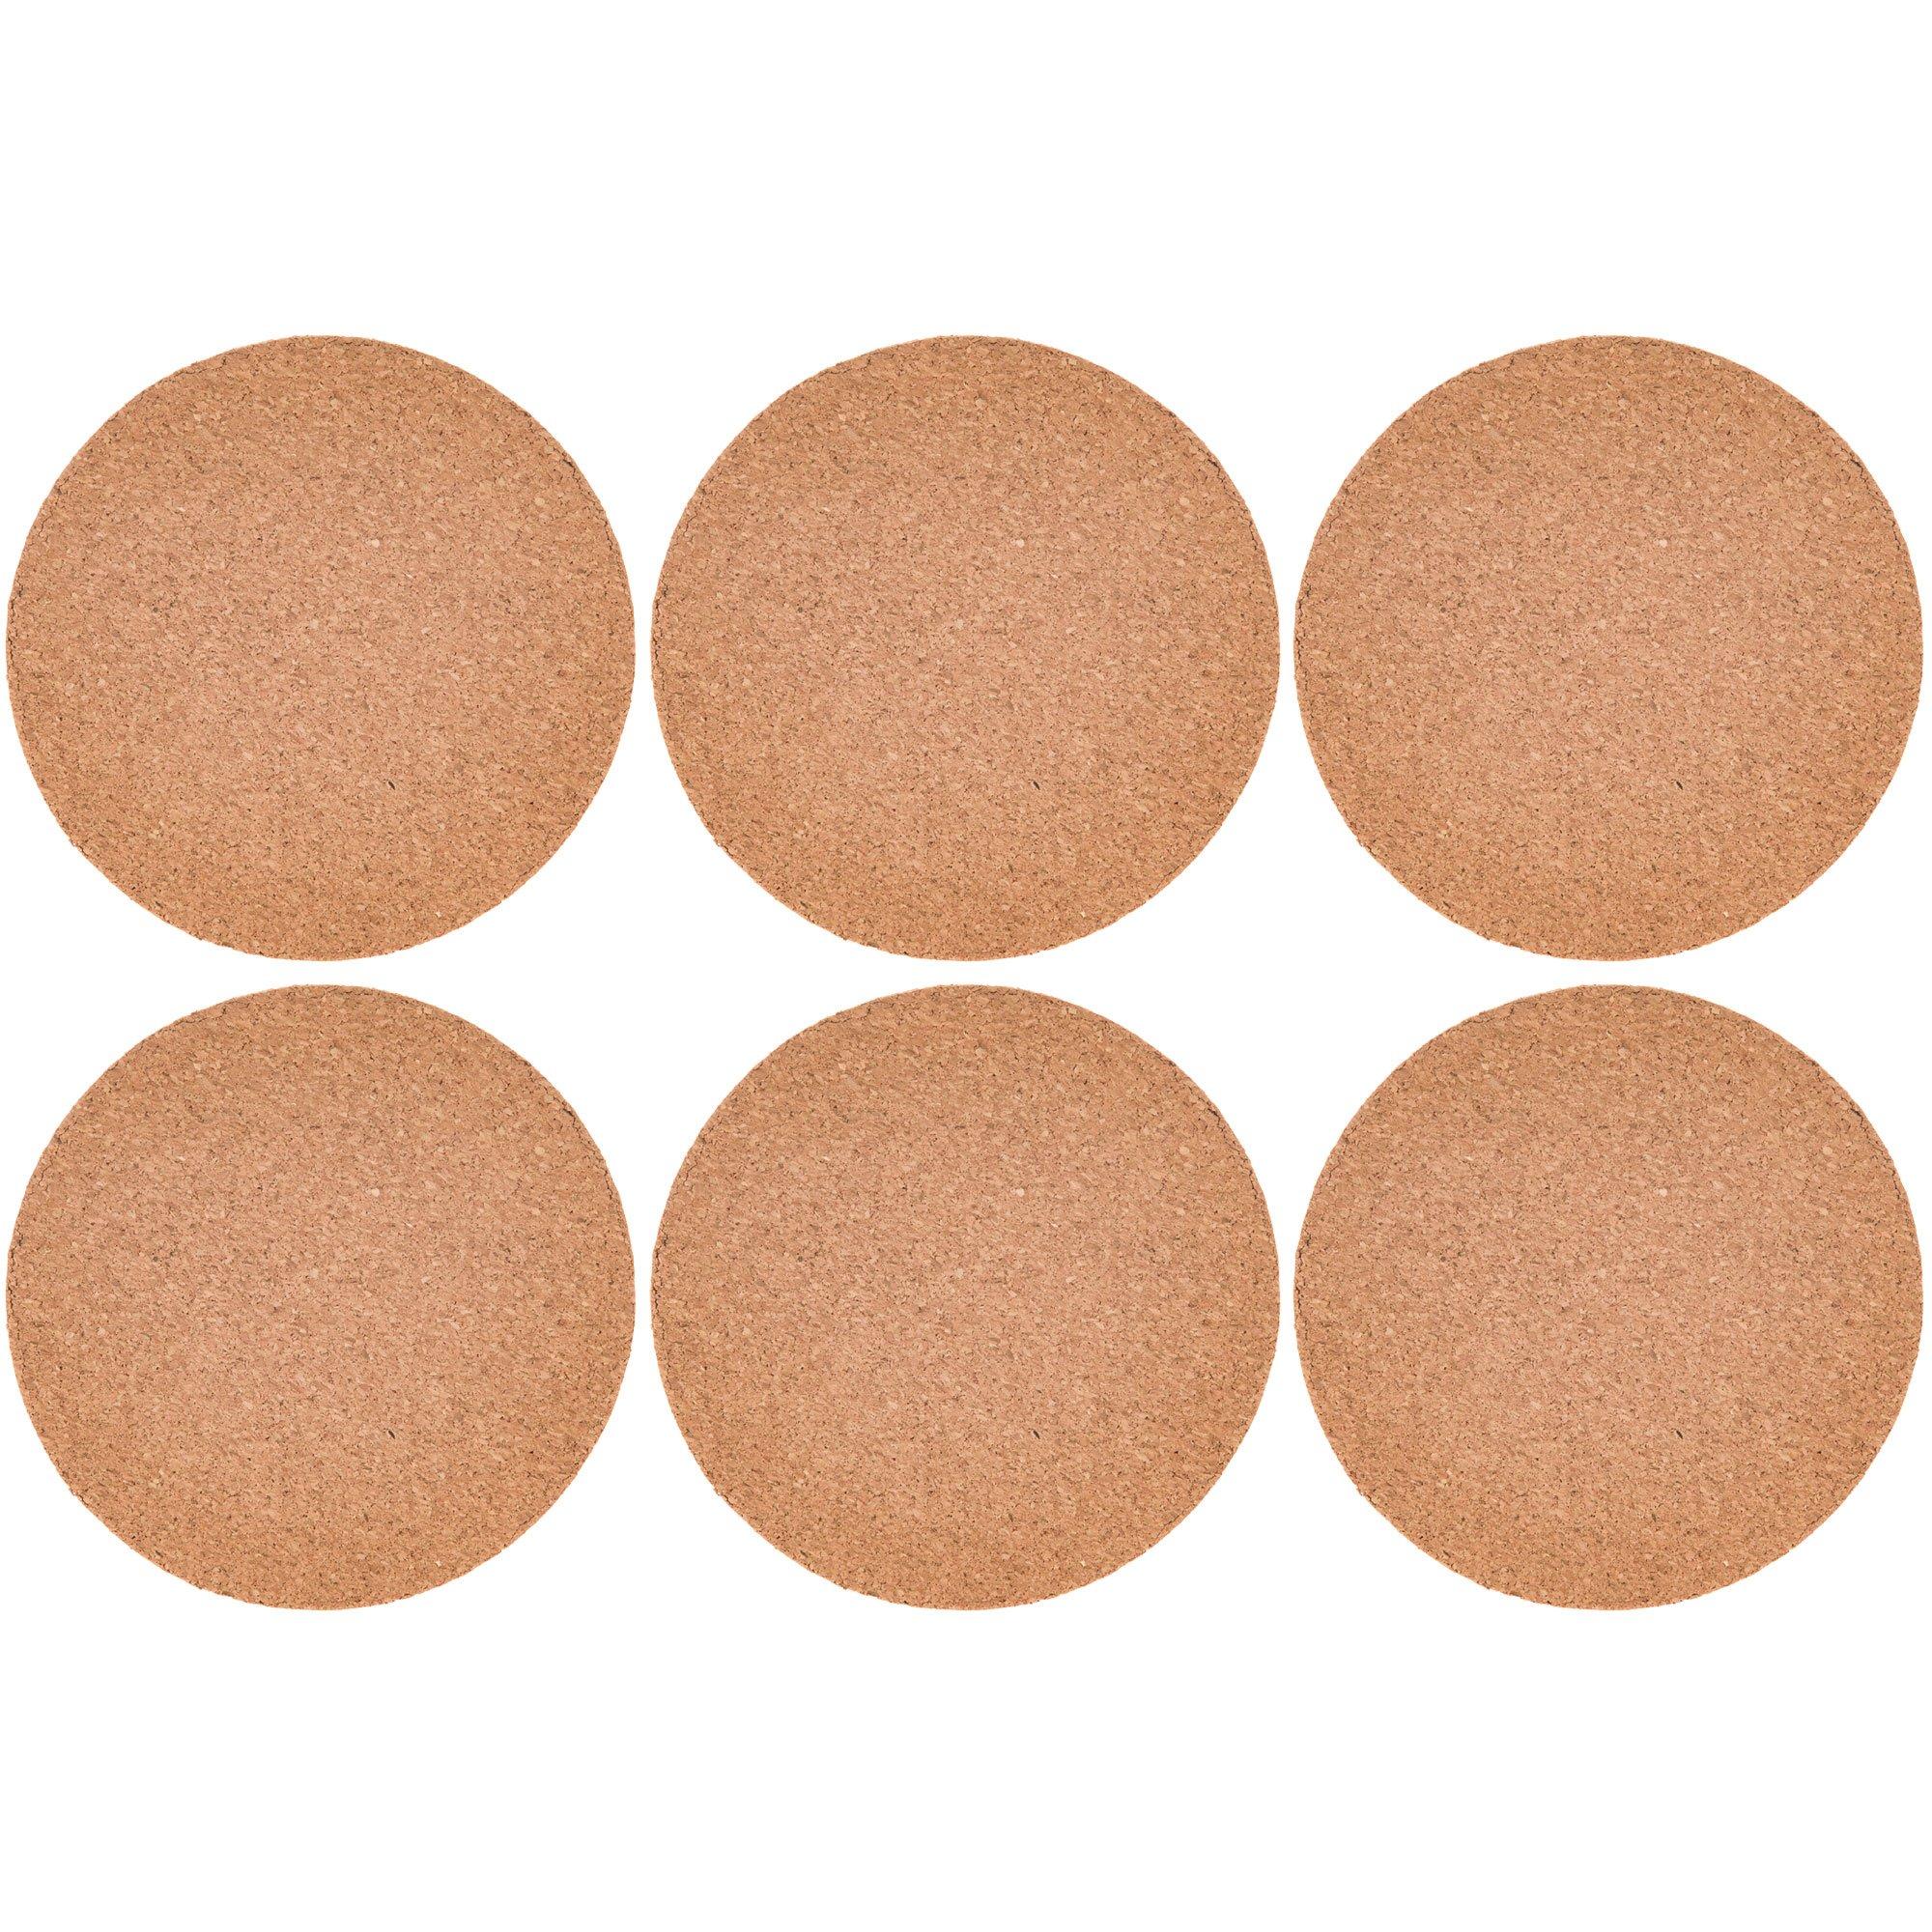 18 Cork Coasters Bulk 4 Inch Round Lip Cup Holder Leak Proof Cork Coasters  For Drinks Reusable Abso